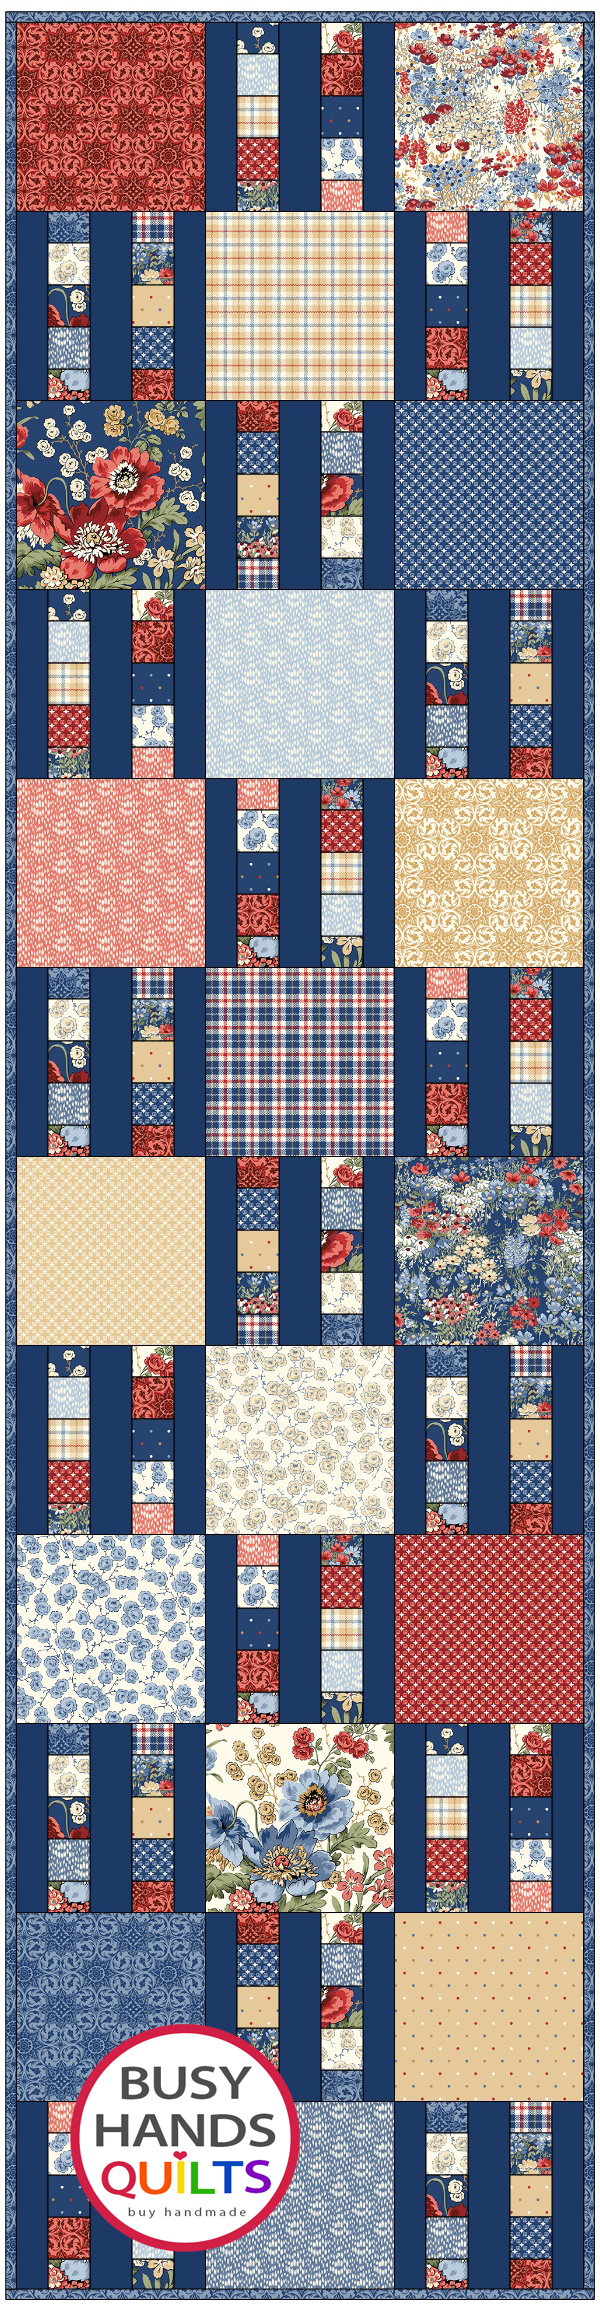 Mini Picket Fence Quilt Pattern PDF DOWNLOAD Busy Hands Quilts $12.99